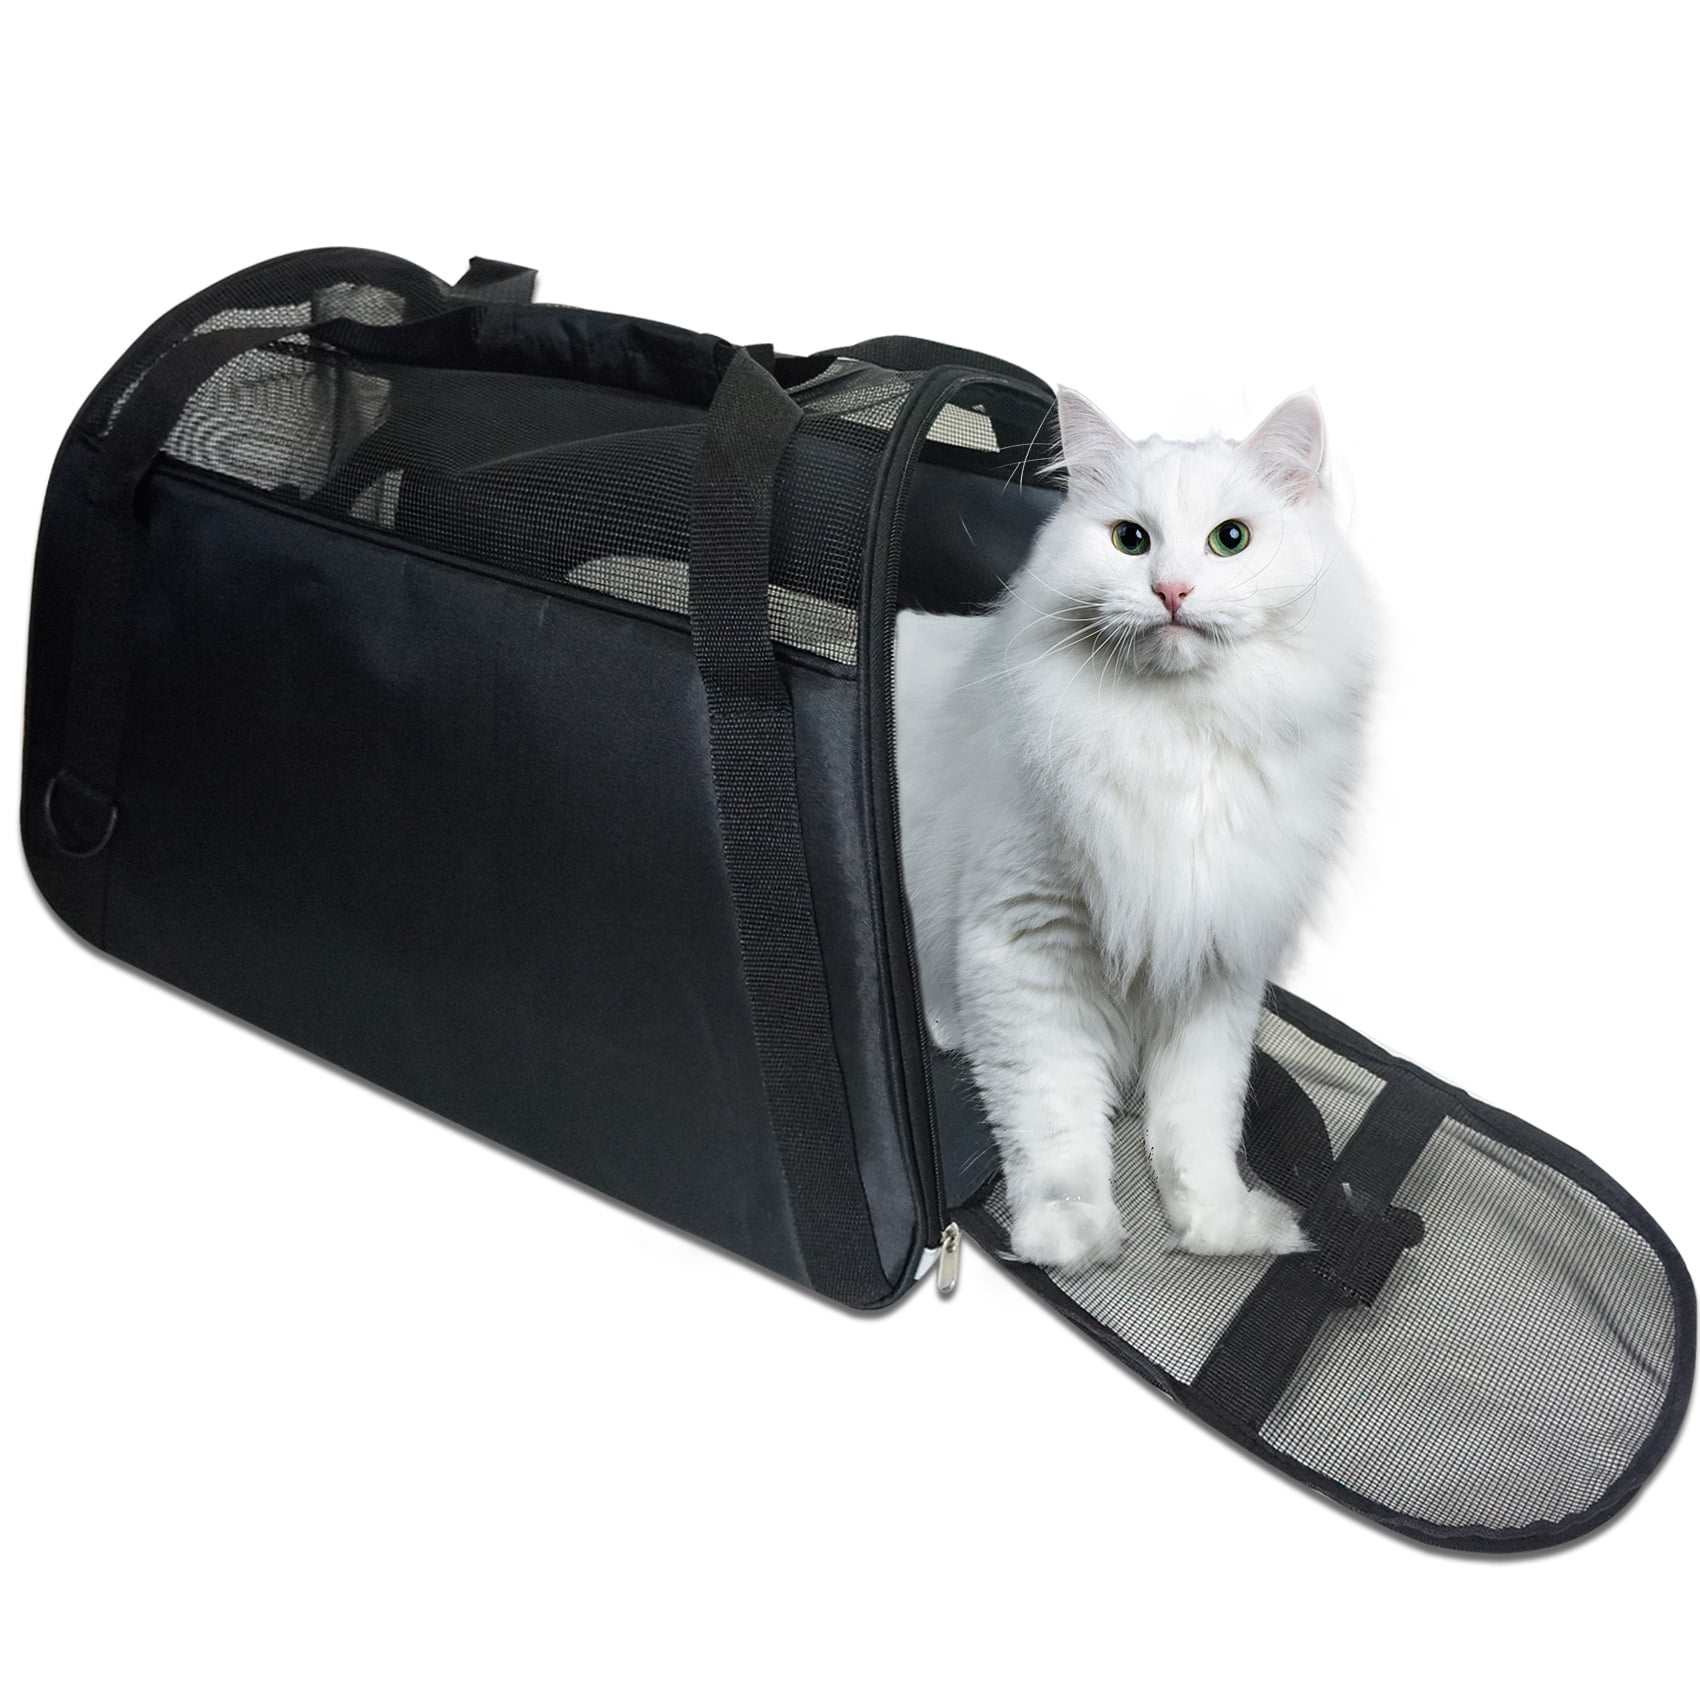 OODOSI Pet Carrier Soft-Sided Cat Carrier Dog Carrier Portable Dog Travel  Bag with Adjustable Strap Mesh Breathable Windows for Small Medium Cats Dogs